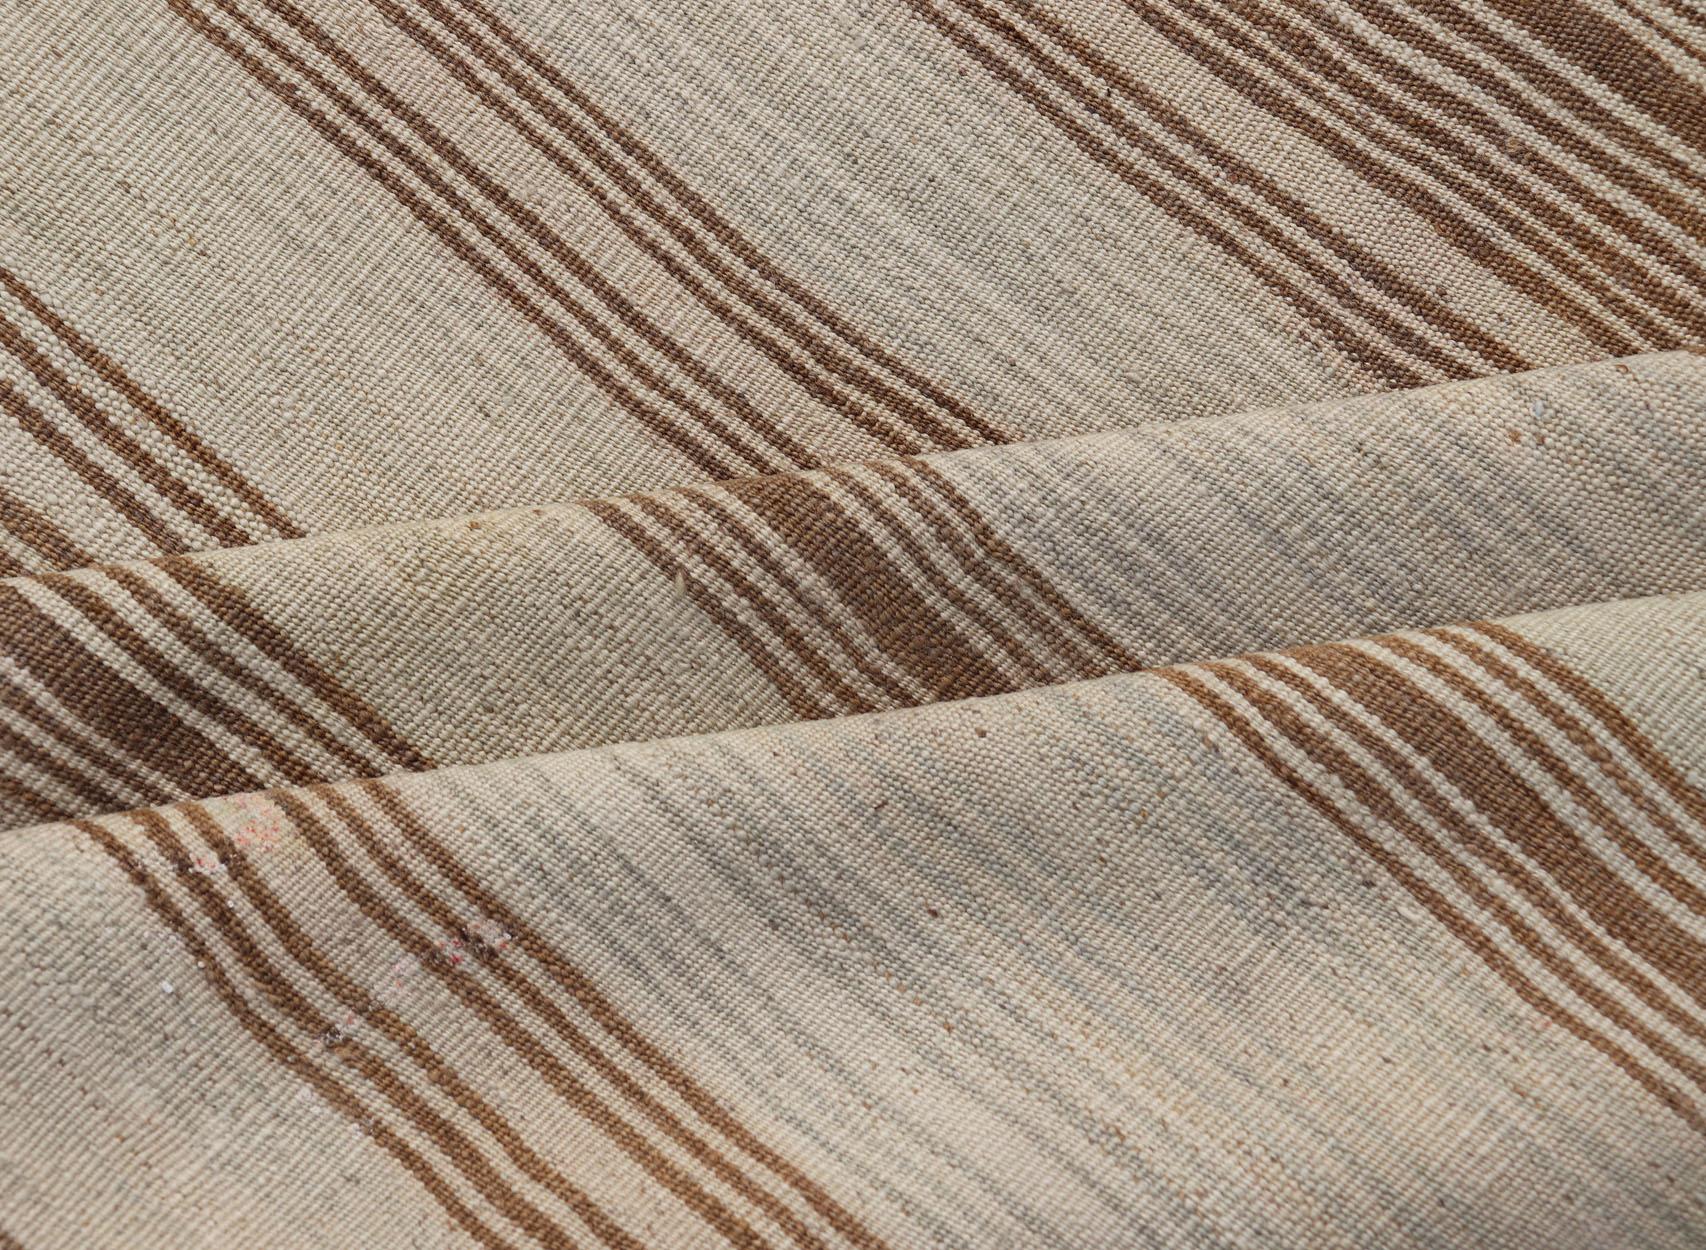 Vintage Turkish Kilim with Horizontal Stripes in Tan, Brown and Grey For Sale 4